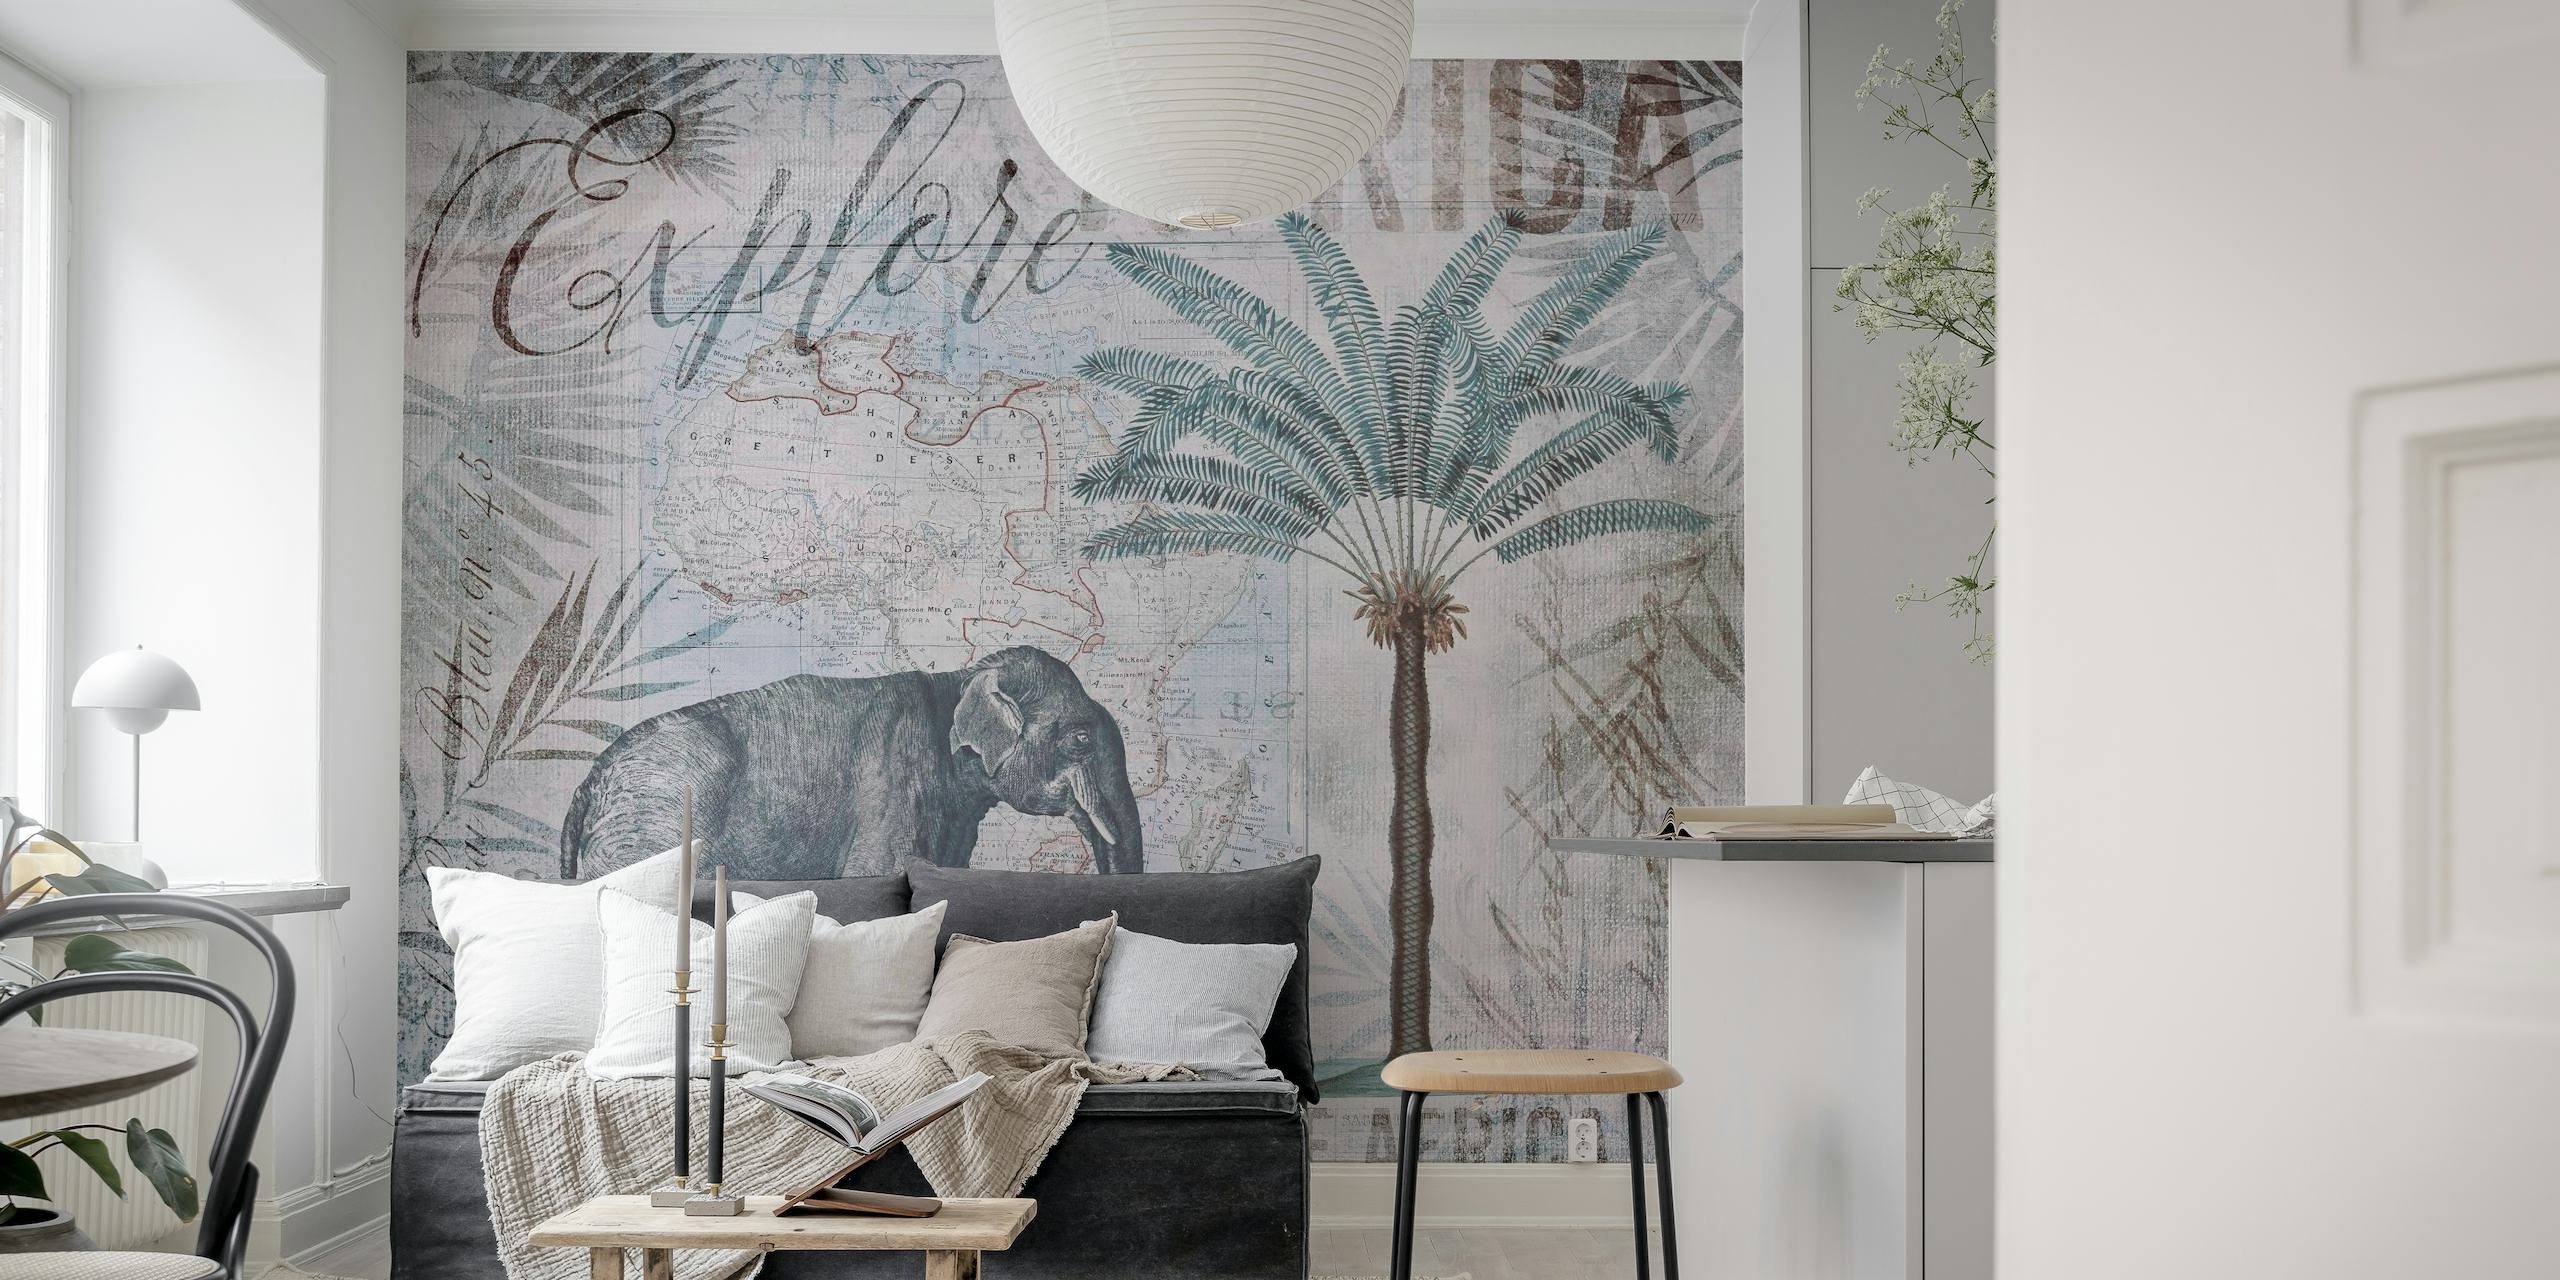 African elephant wall mural with vintage sepia tones, palm tree silhouettes, and 'Africa' text elements